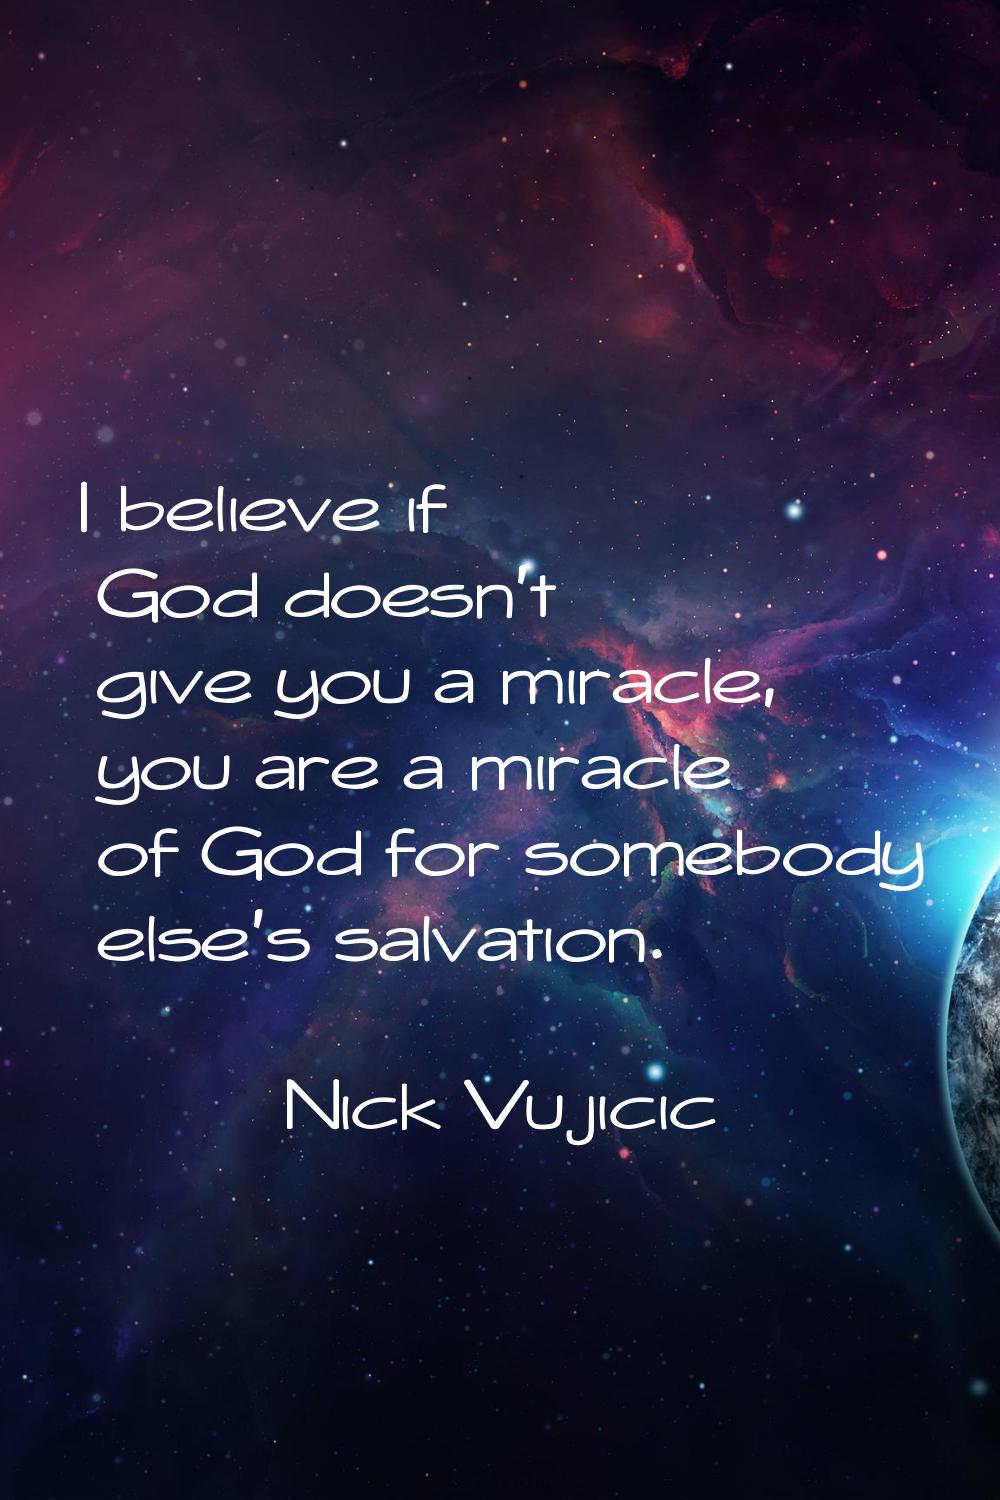 I believe if God doesn't give you a miracle, you are a miracle of God for somebody else's salvation